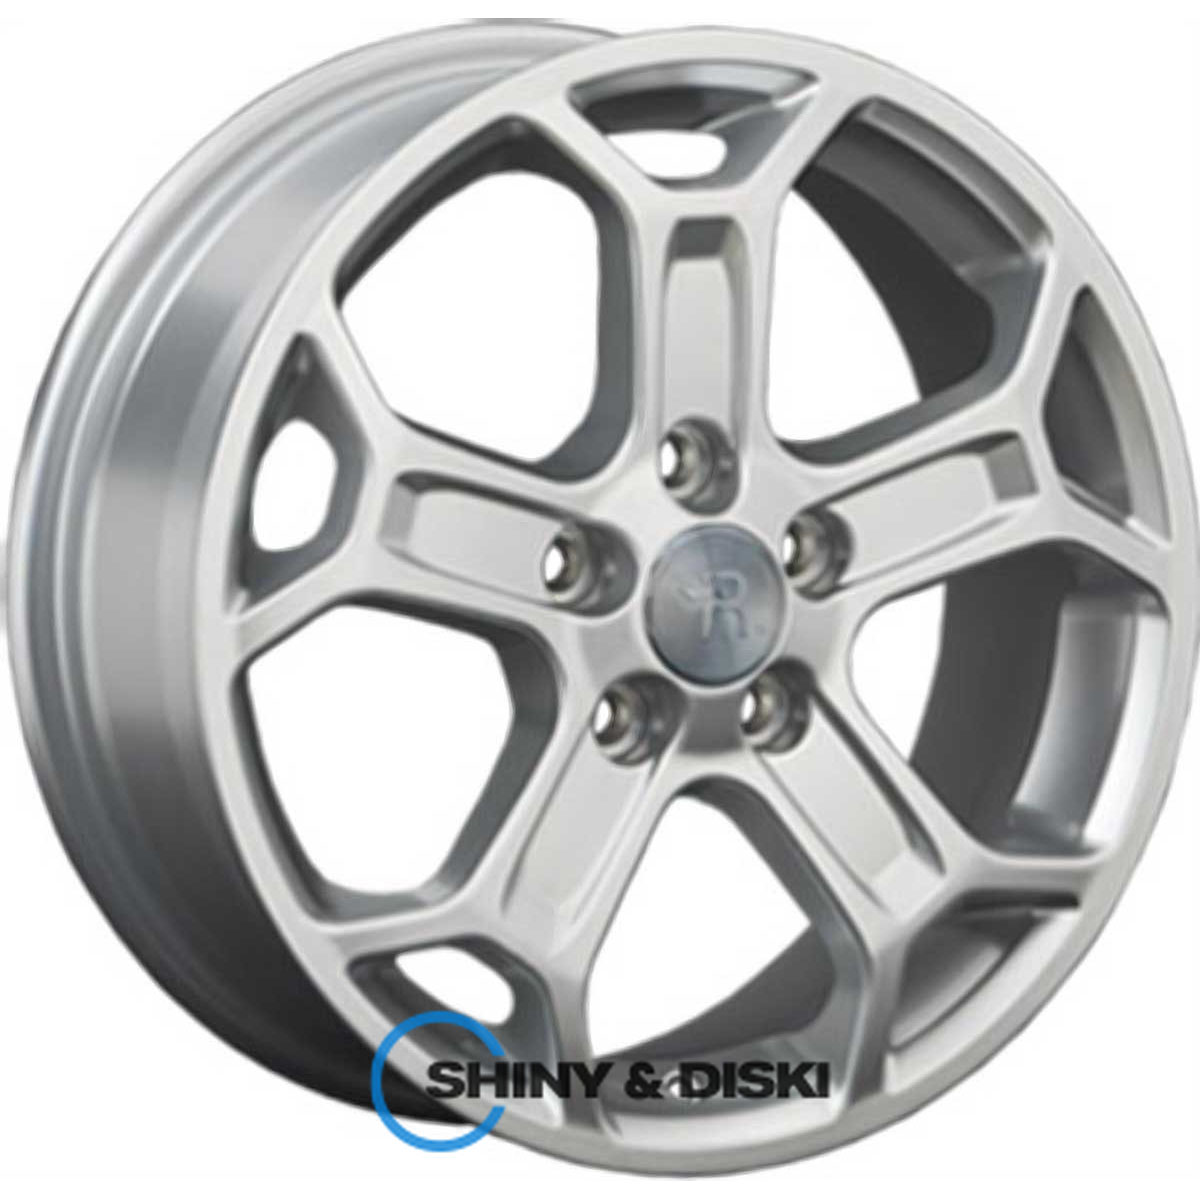 replay ford fd21 s r16 w6.5 pcd5x108 et50 dia63.3